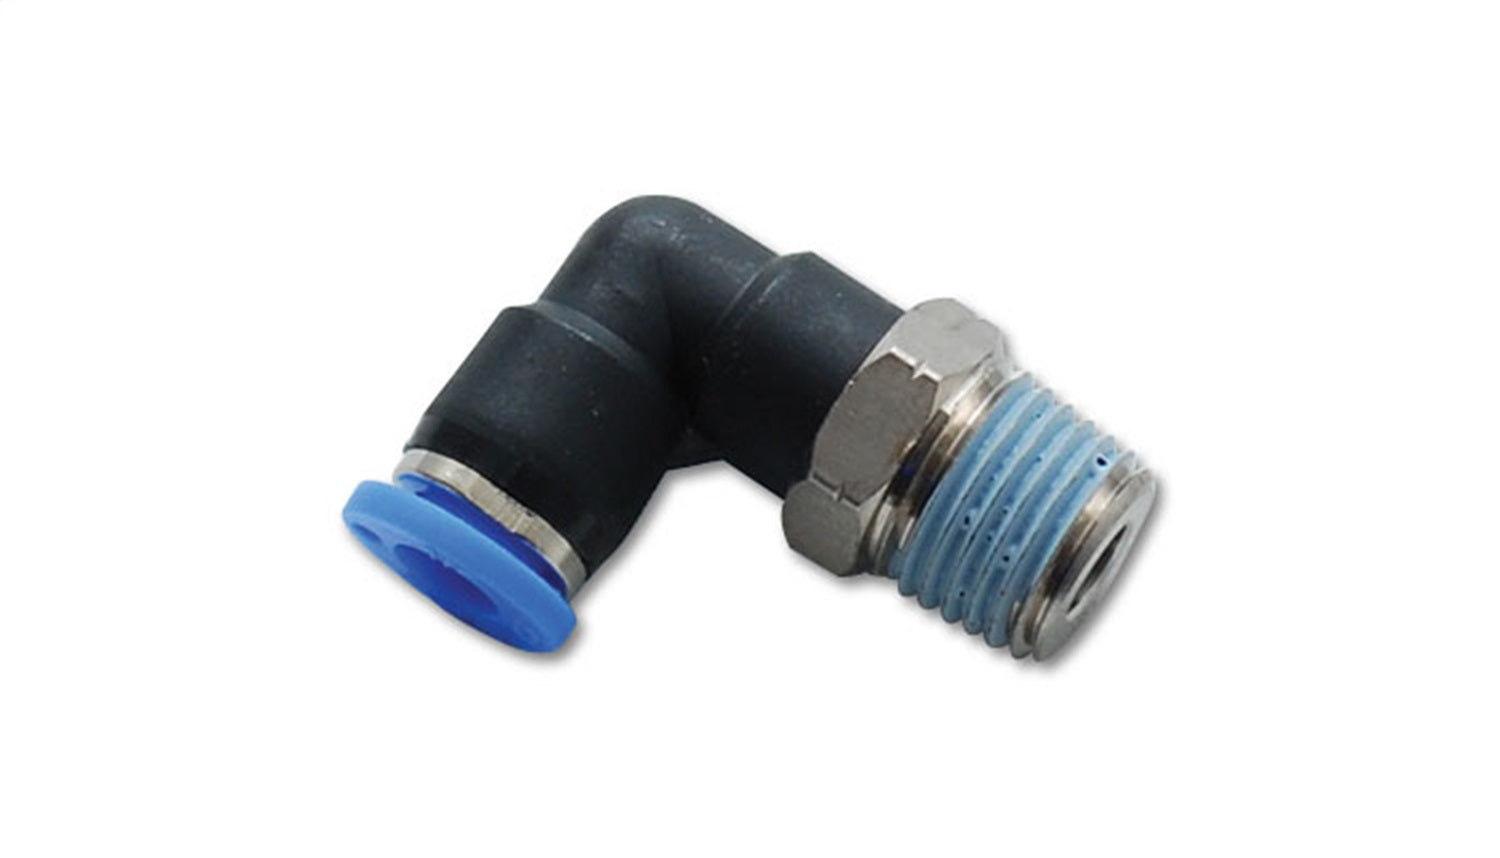 Vibrant Performance Male Elbow Fitting, for 1/4" O.D. Tubing (1/8" NPT Thread)